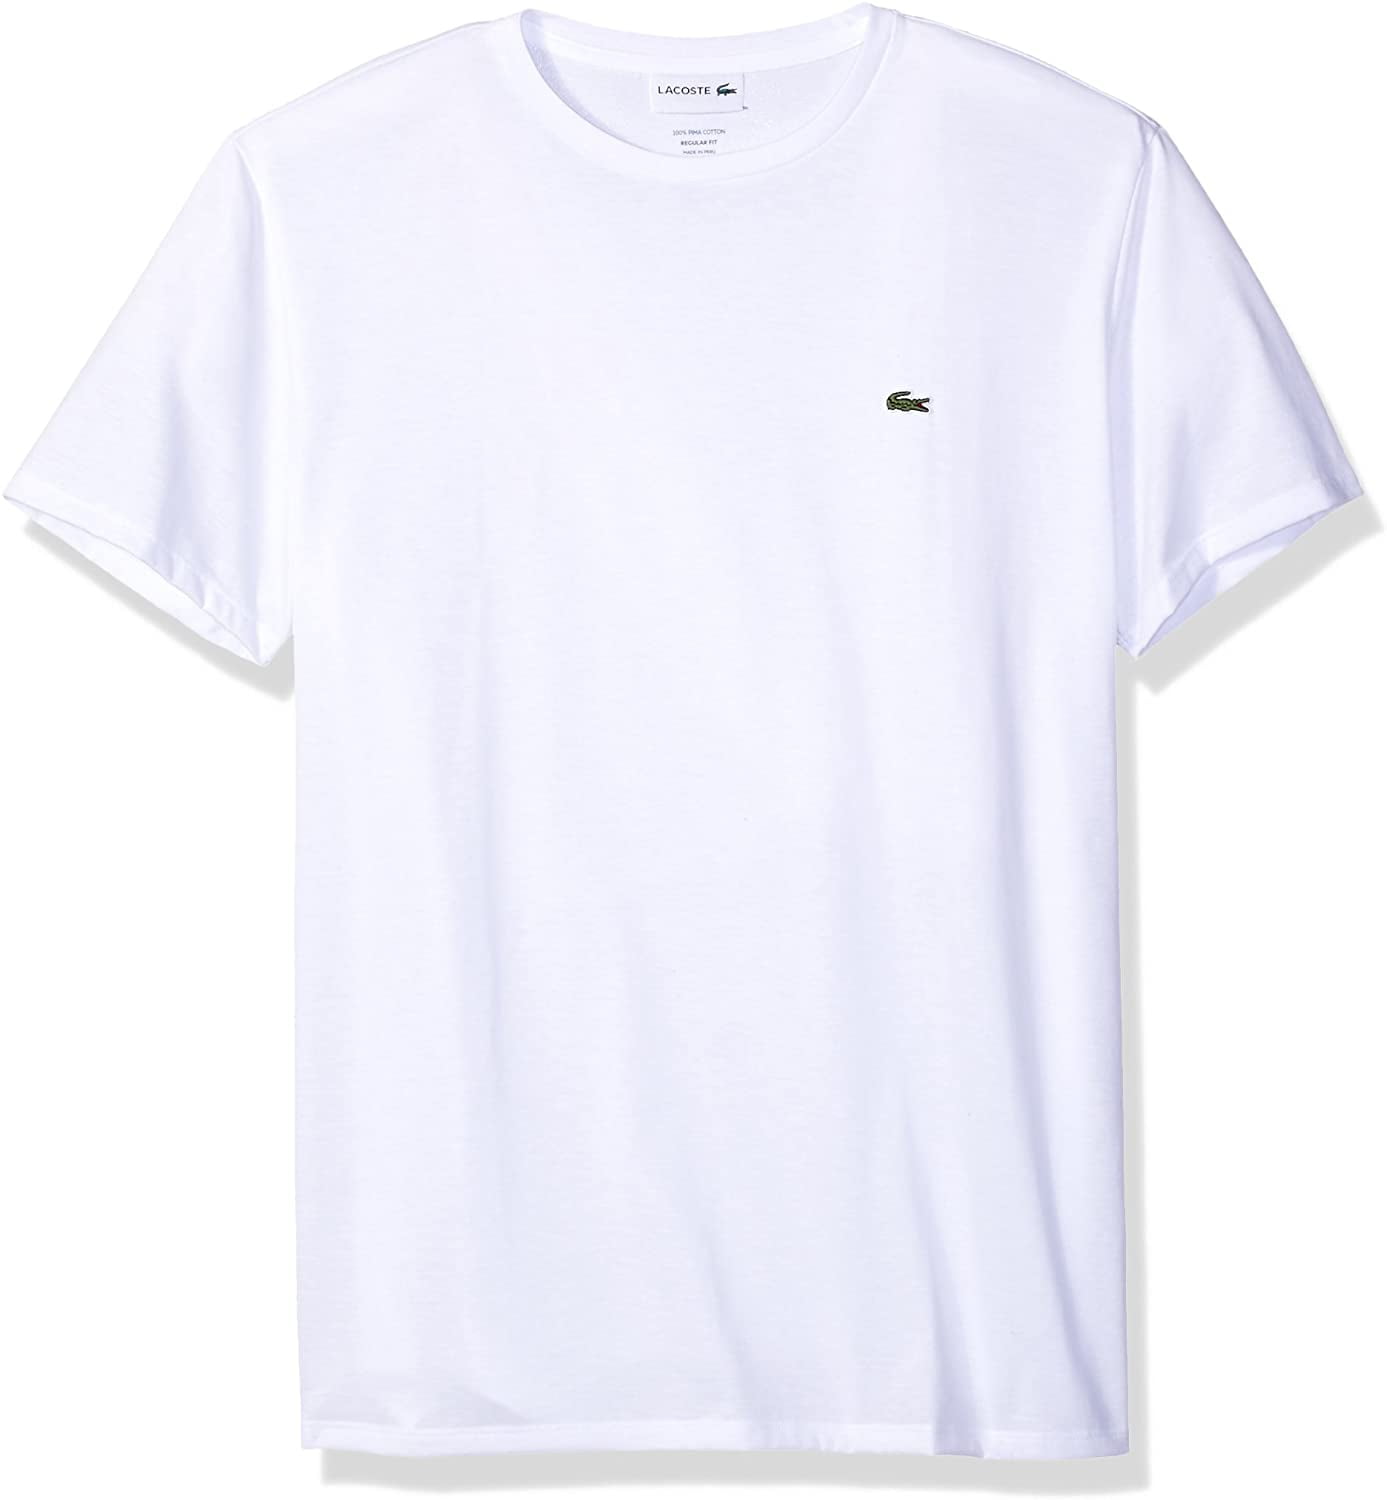 Lacoste Mens Short Sleeve Printed Jersey T-Shirt